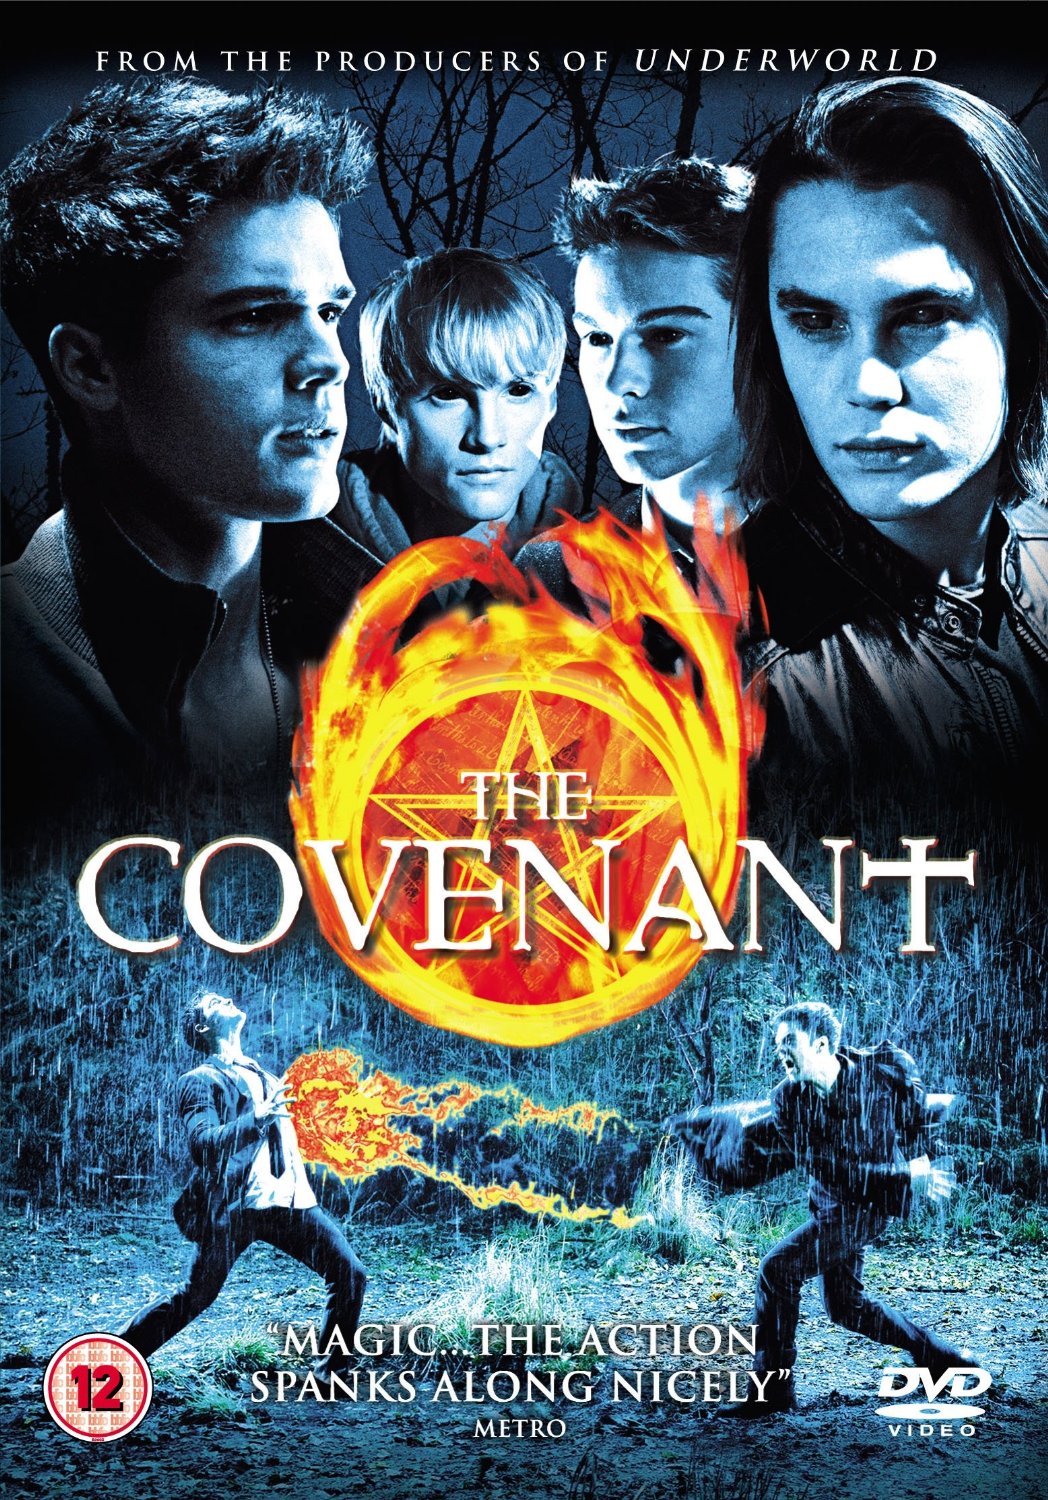 The Covenant #4